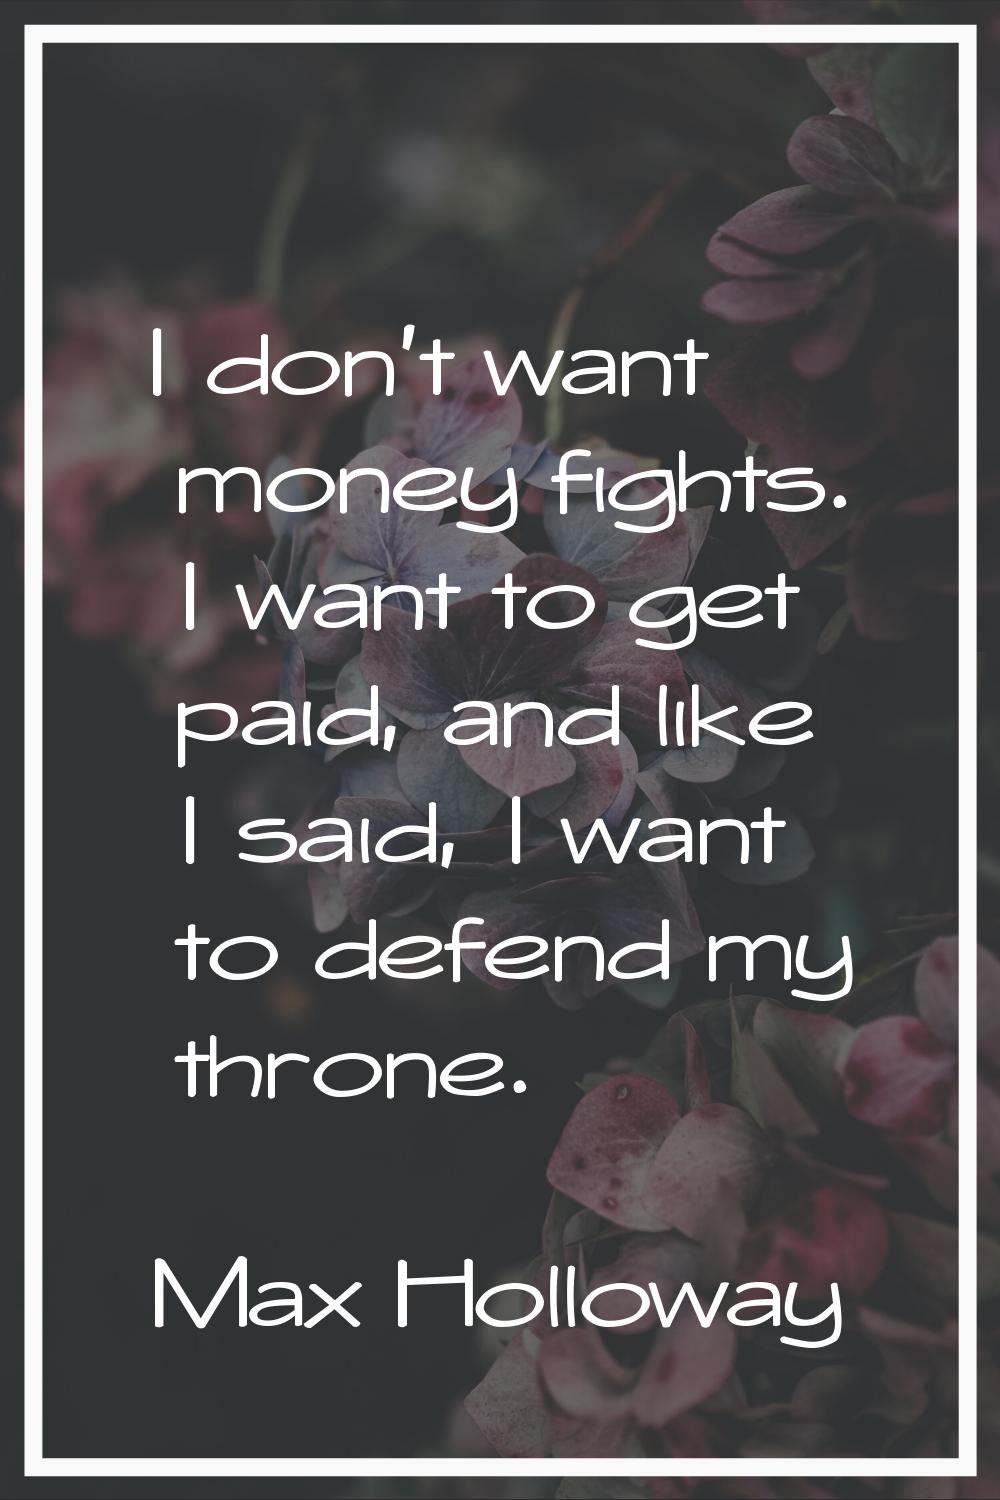 I don't want money fights. I want to get paid, and like I said, I want to defend my throne.